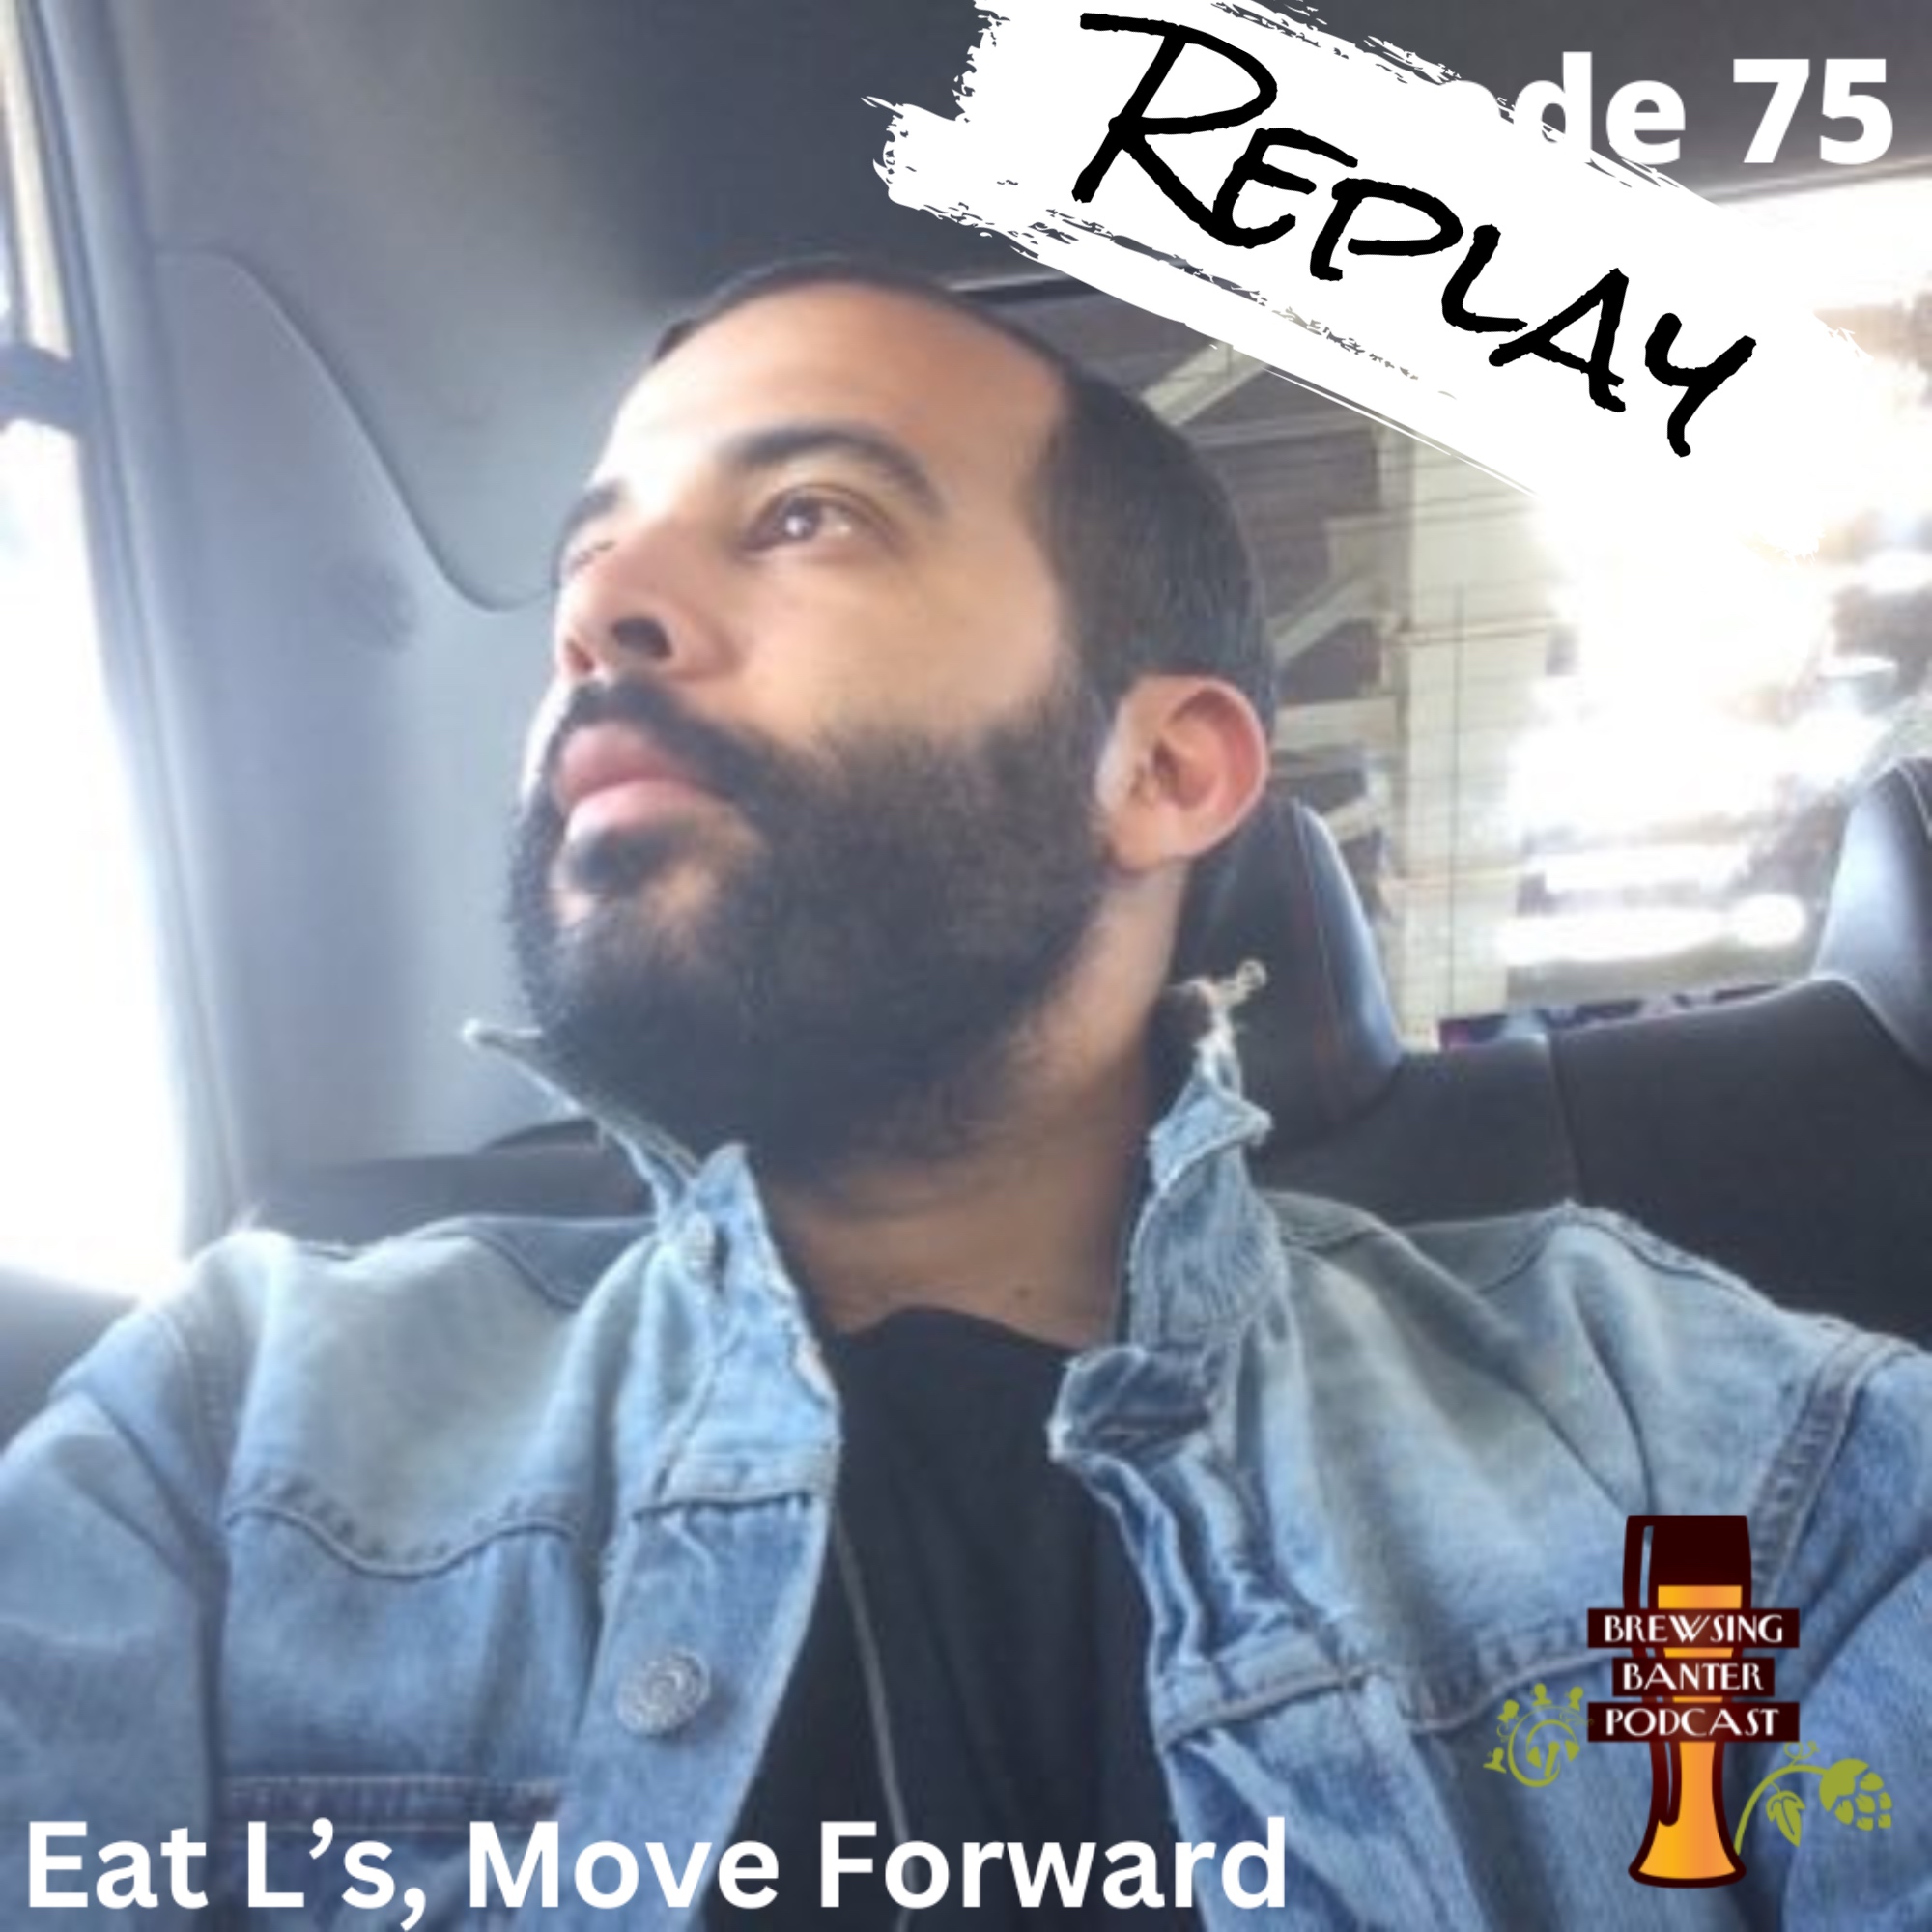 The Replay Series: BBP 75 - Eat L’s, Move Forward Image